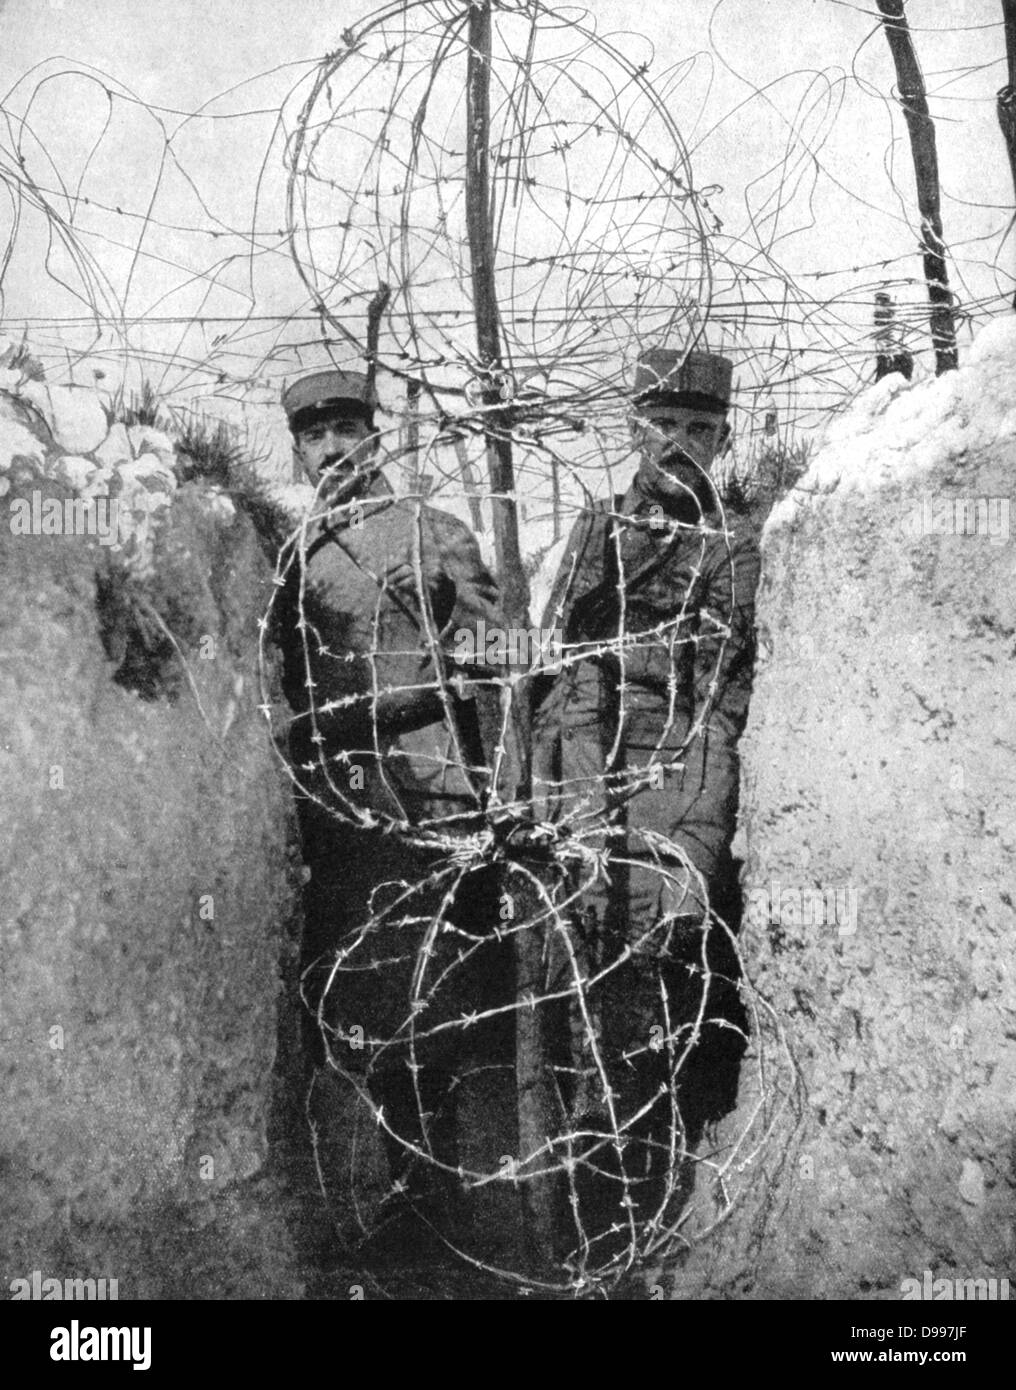 World War I 1914-1918:  Barbed wire entaglements protecting French soldiers in their trenches.  From  'Le Pays de France', 2 September 1915.  Military, Army Stock Photo